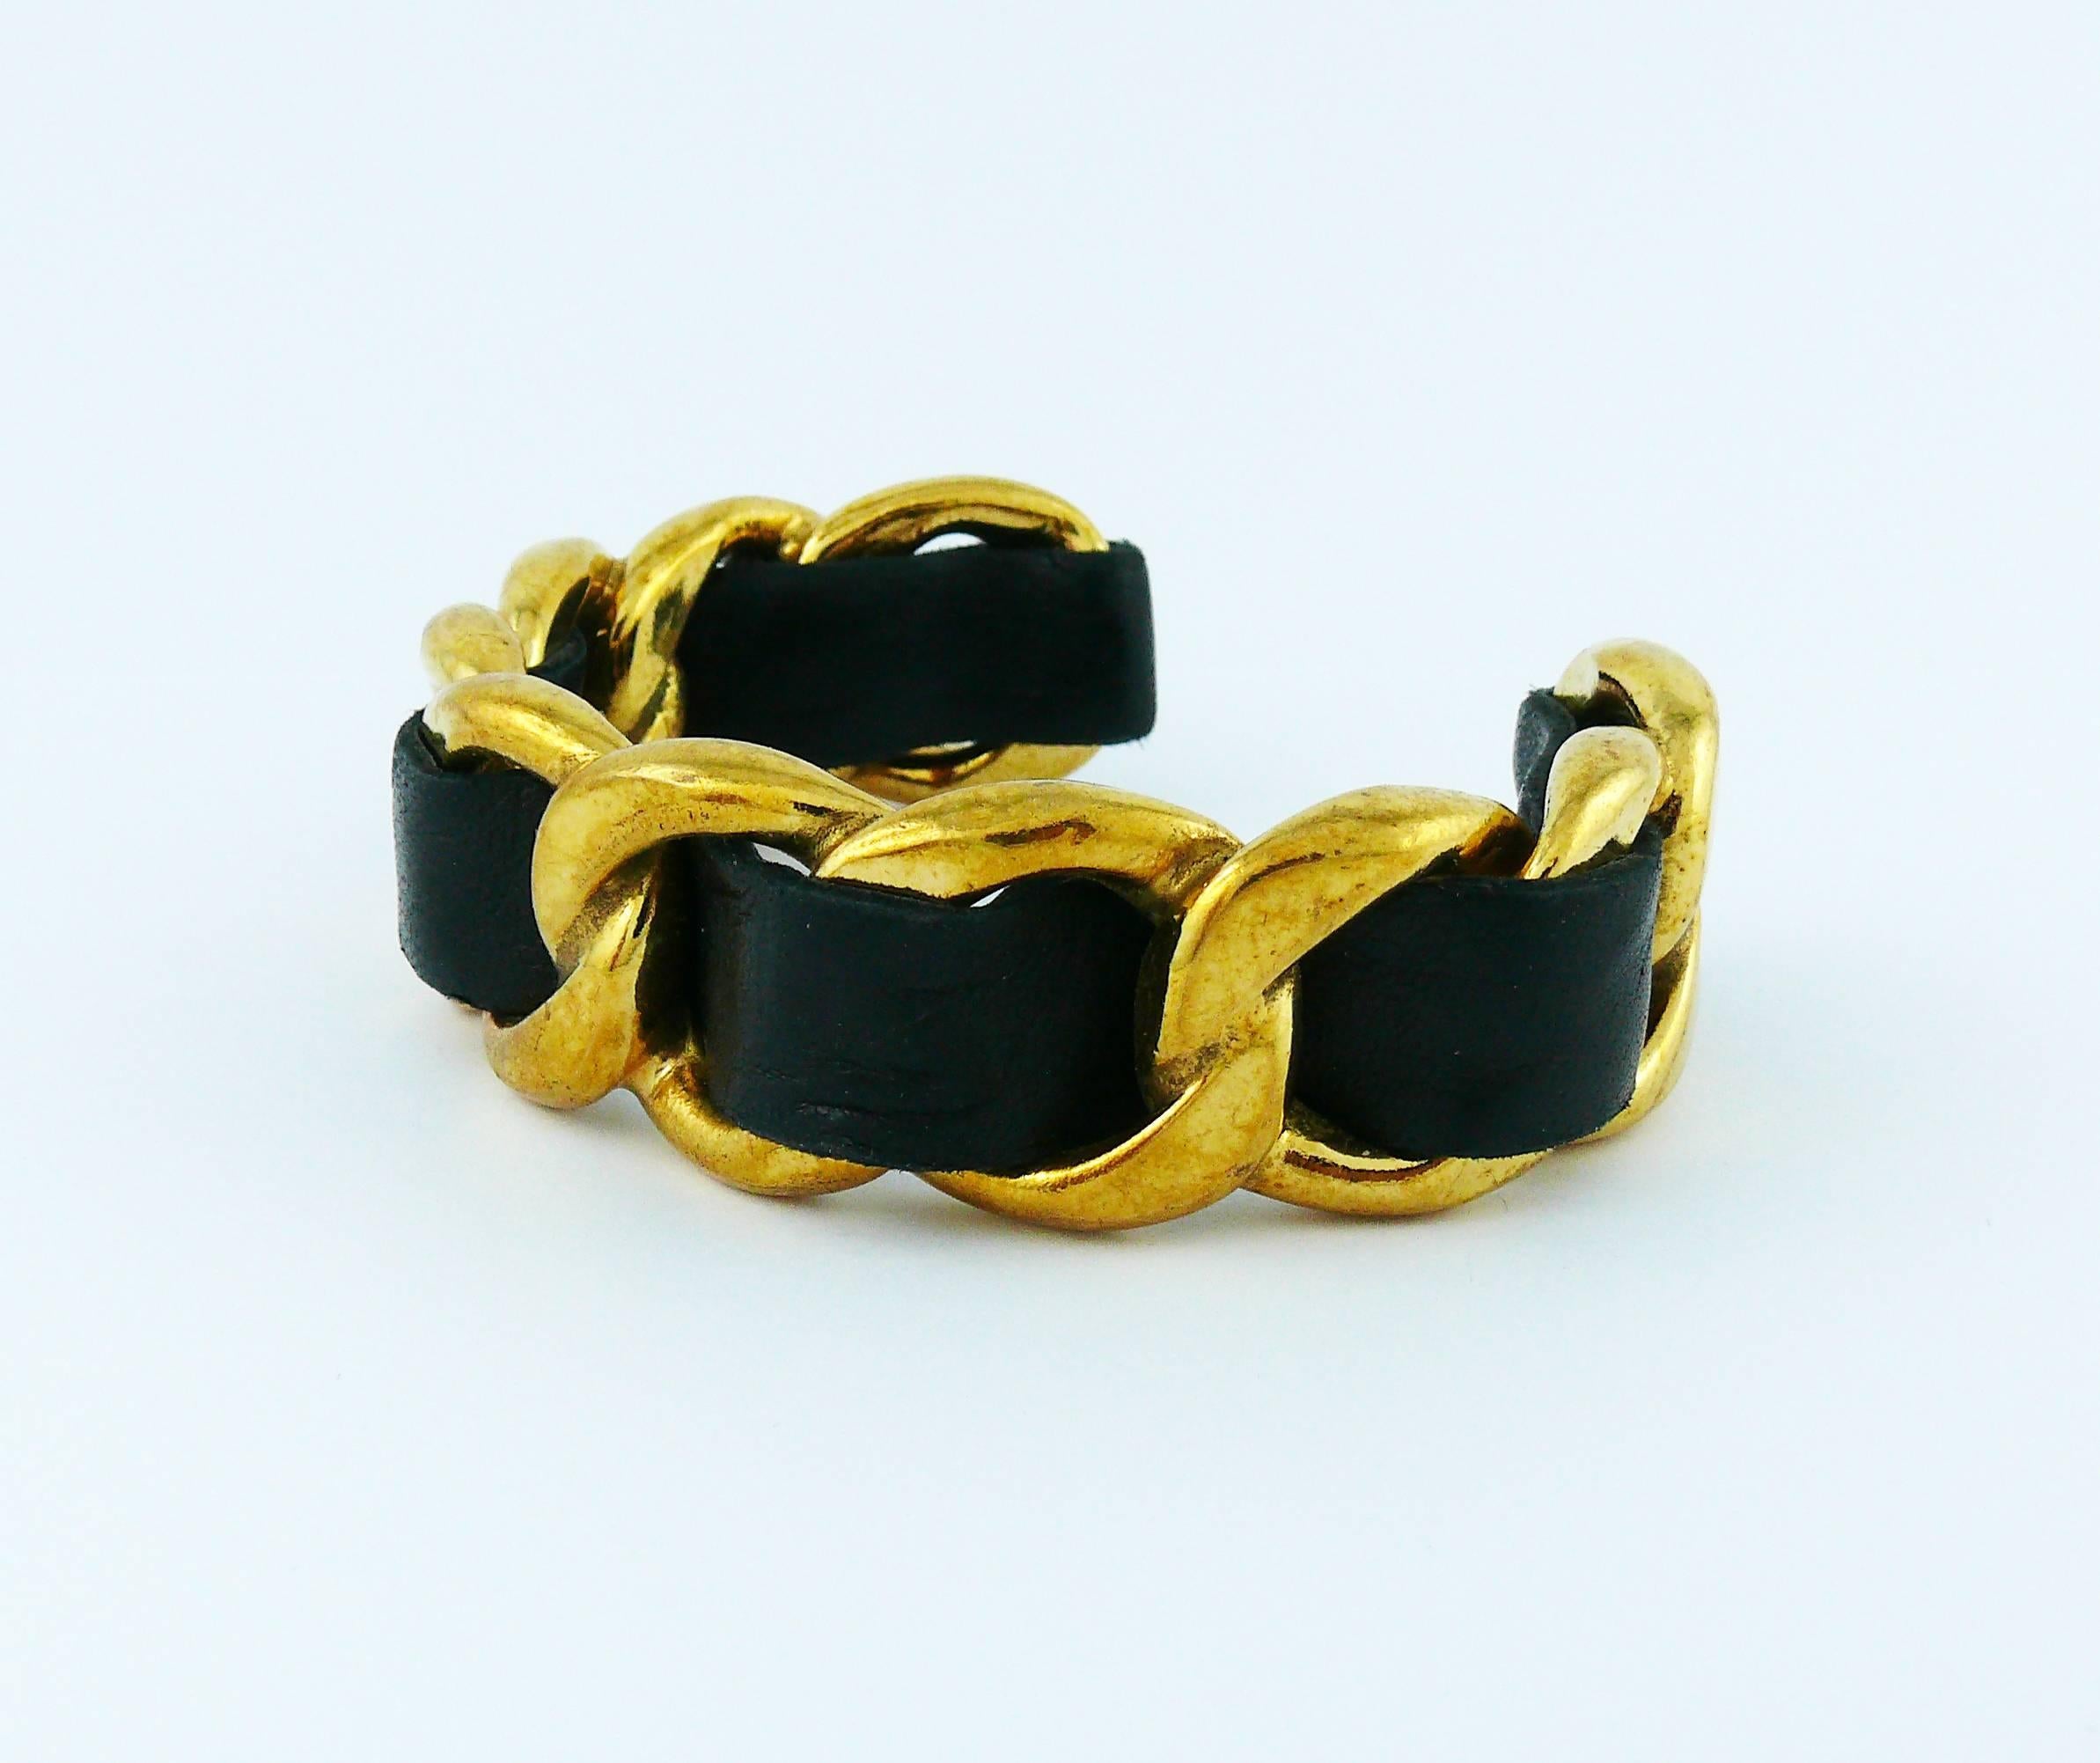 Chanel Vintage 1990 Iconic Chain and Leather Cuff Bracelet For Sale 2